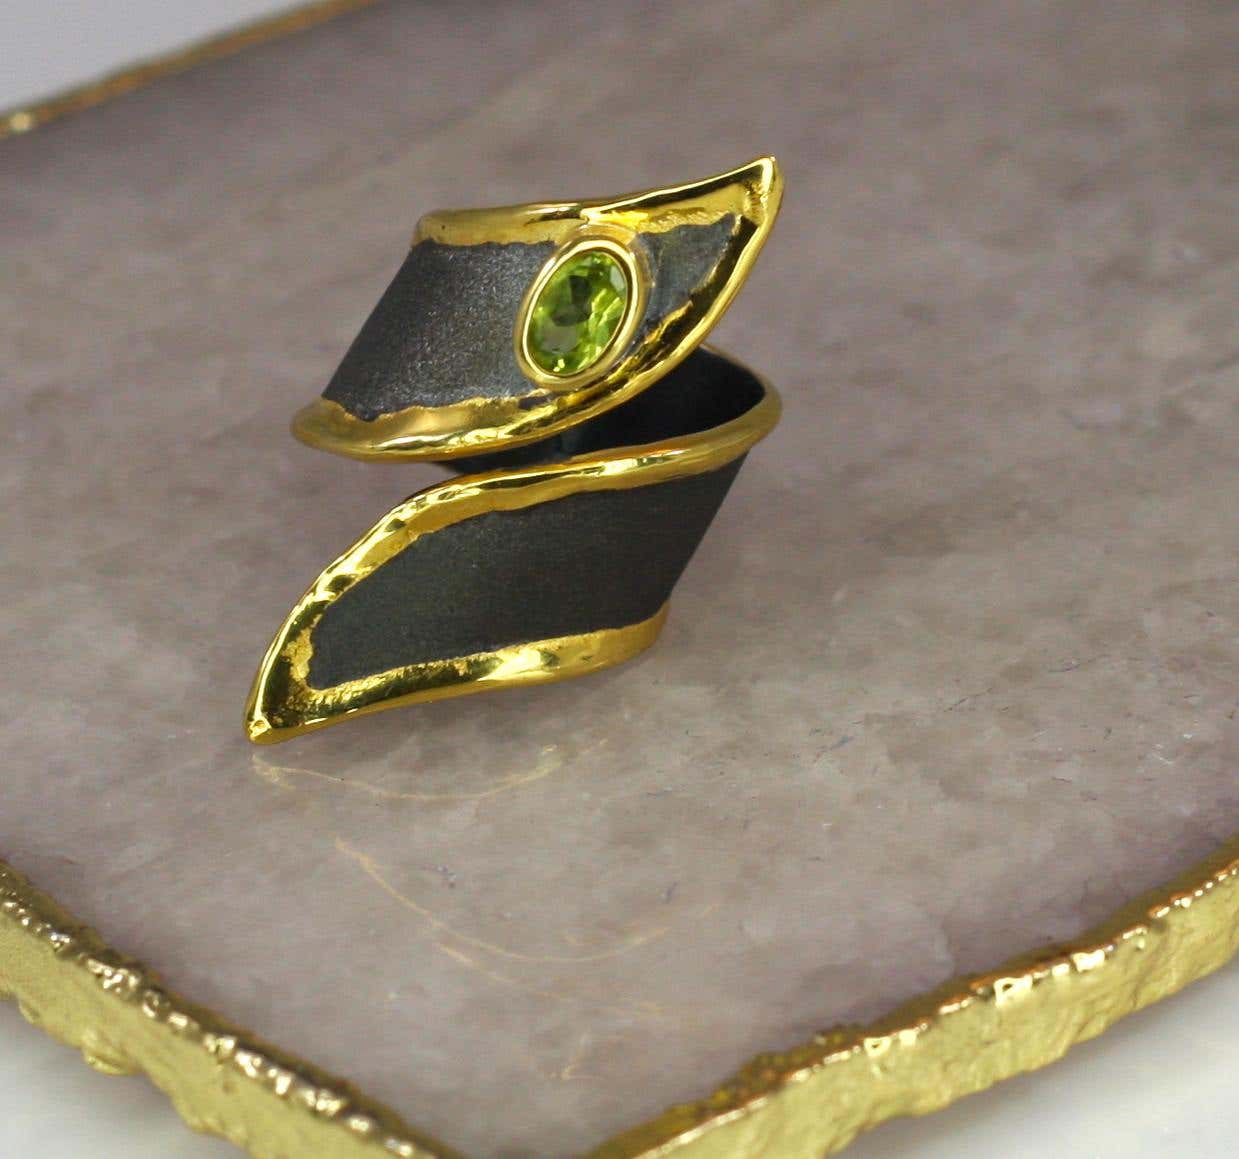 Eclyps Peridot Silver Ring Finished with Ruthenium and 24 Karat Gold